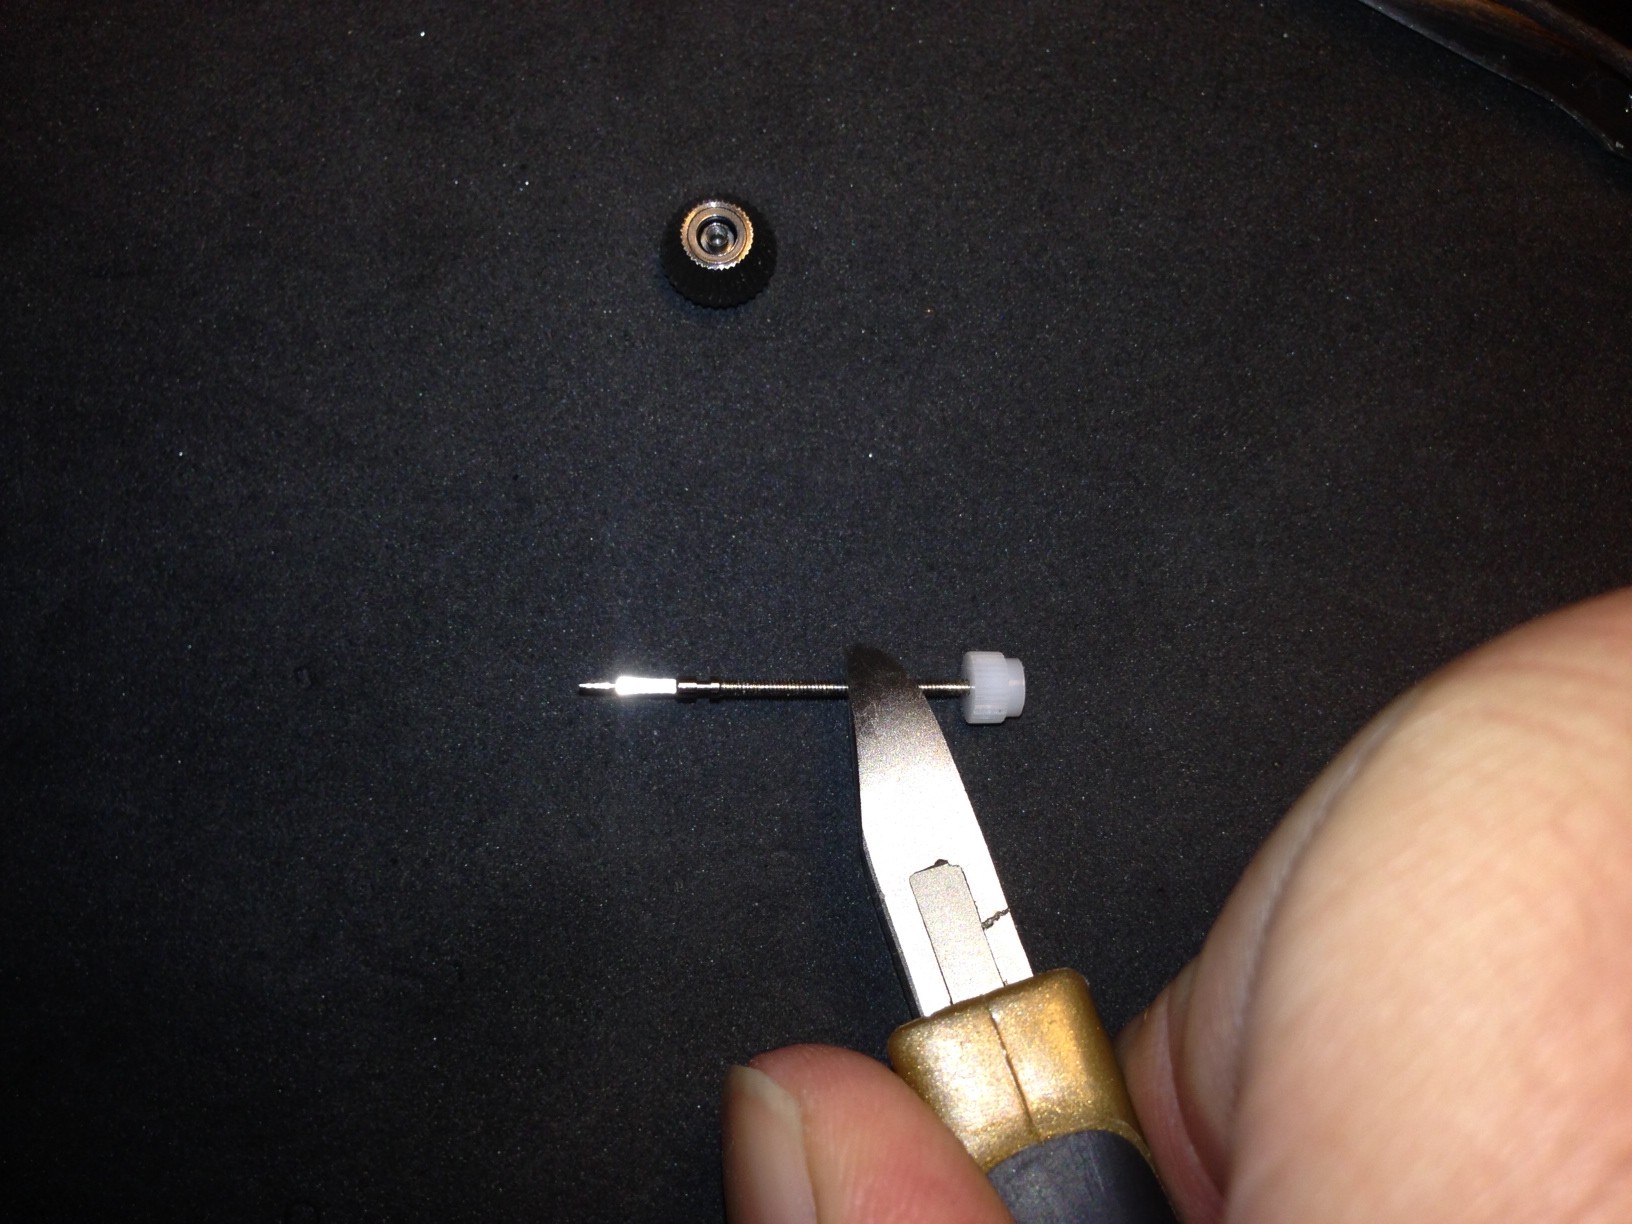 How to build your own mechanical watch - cut the stem